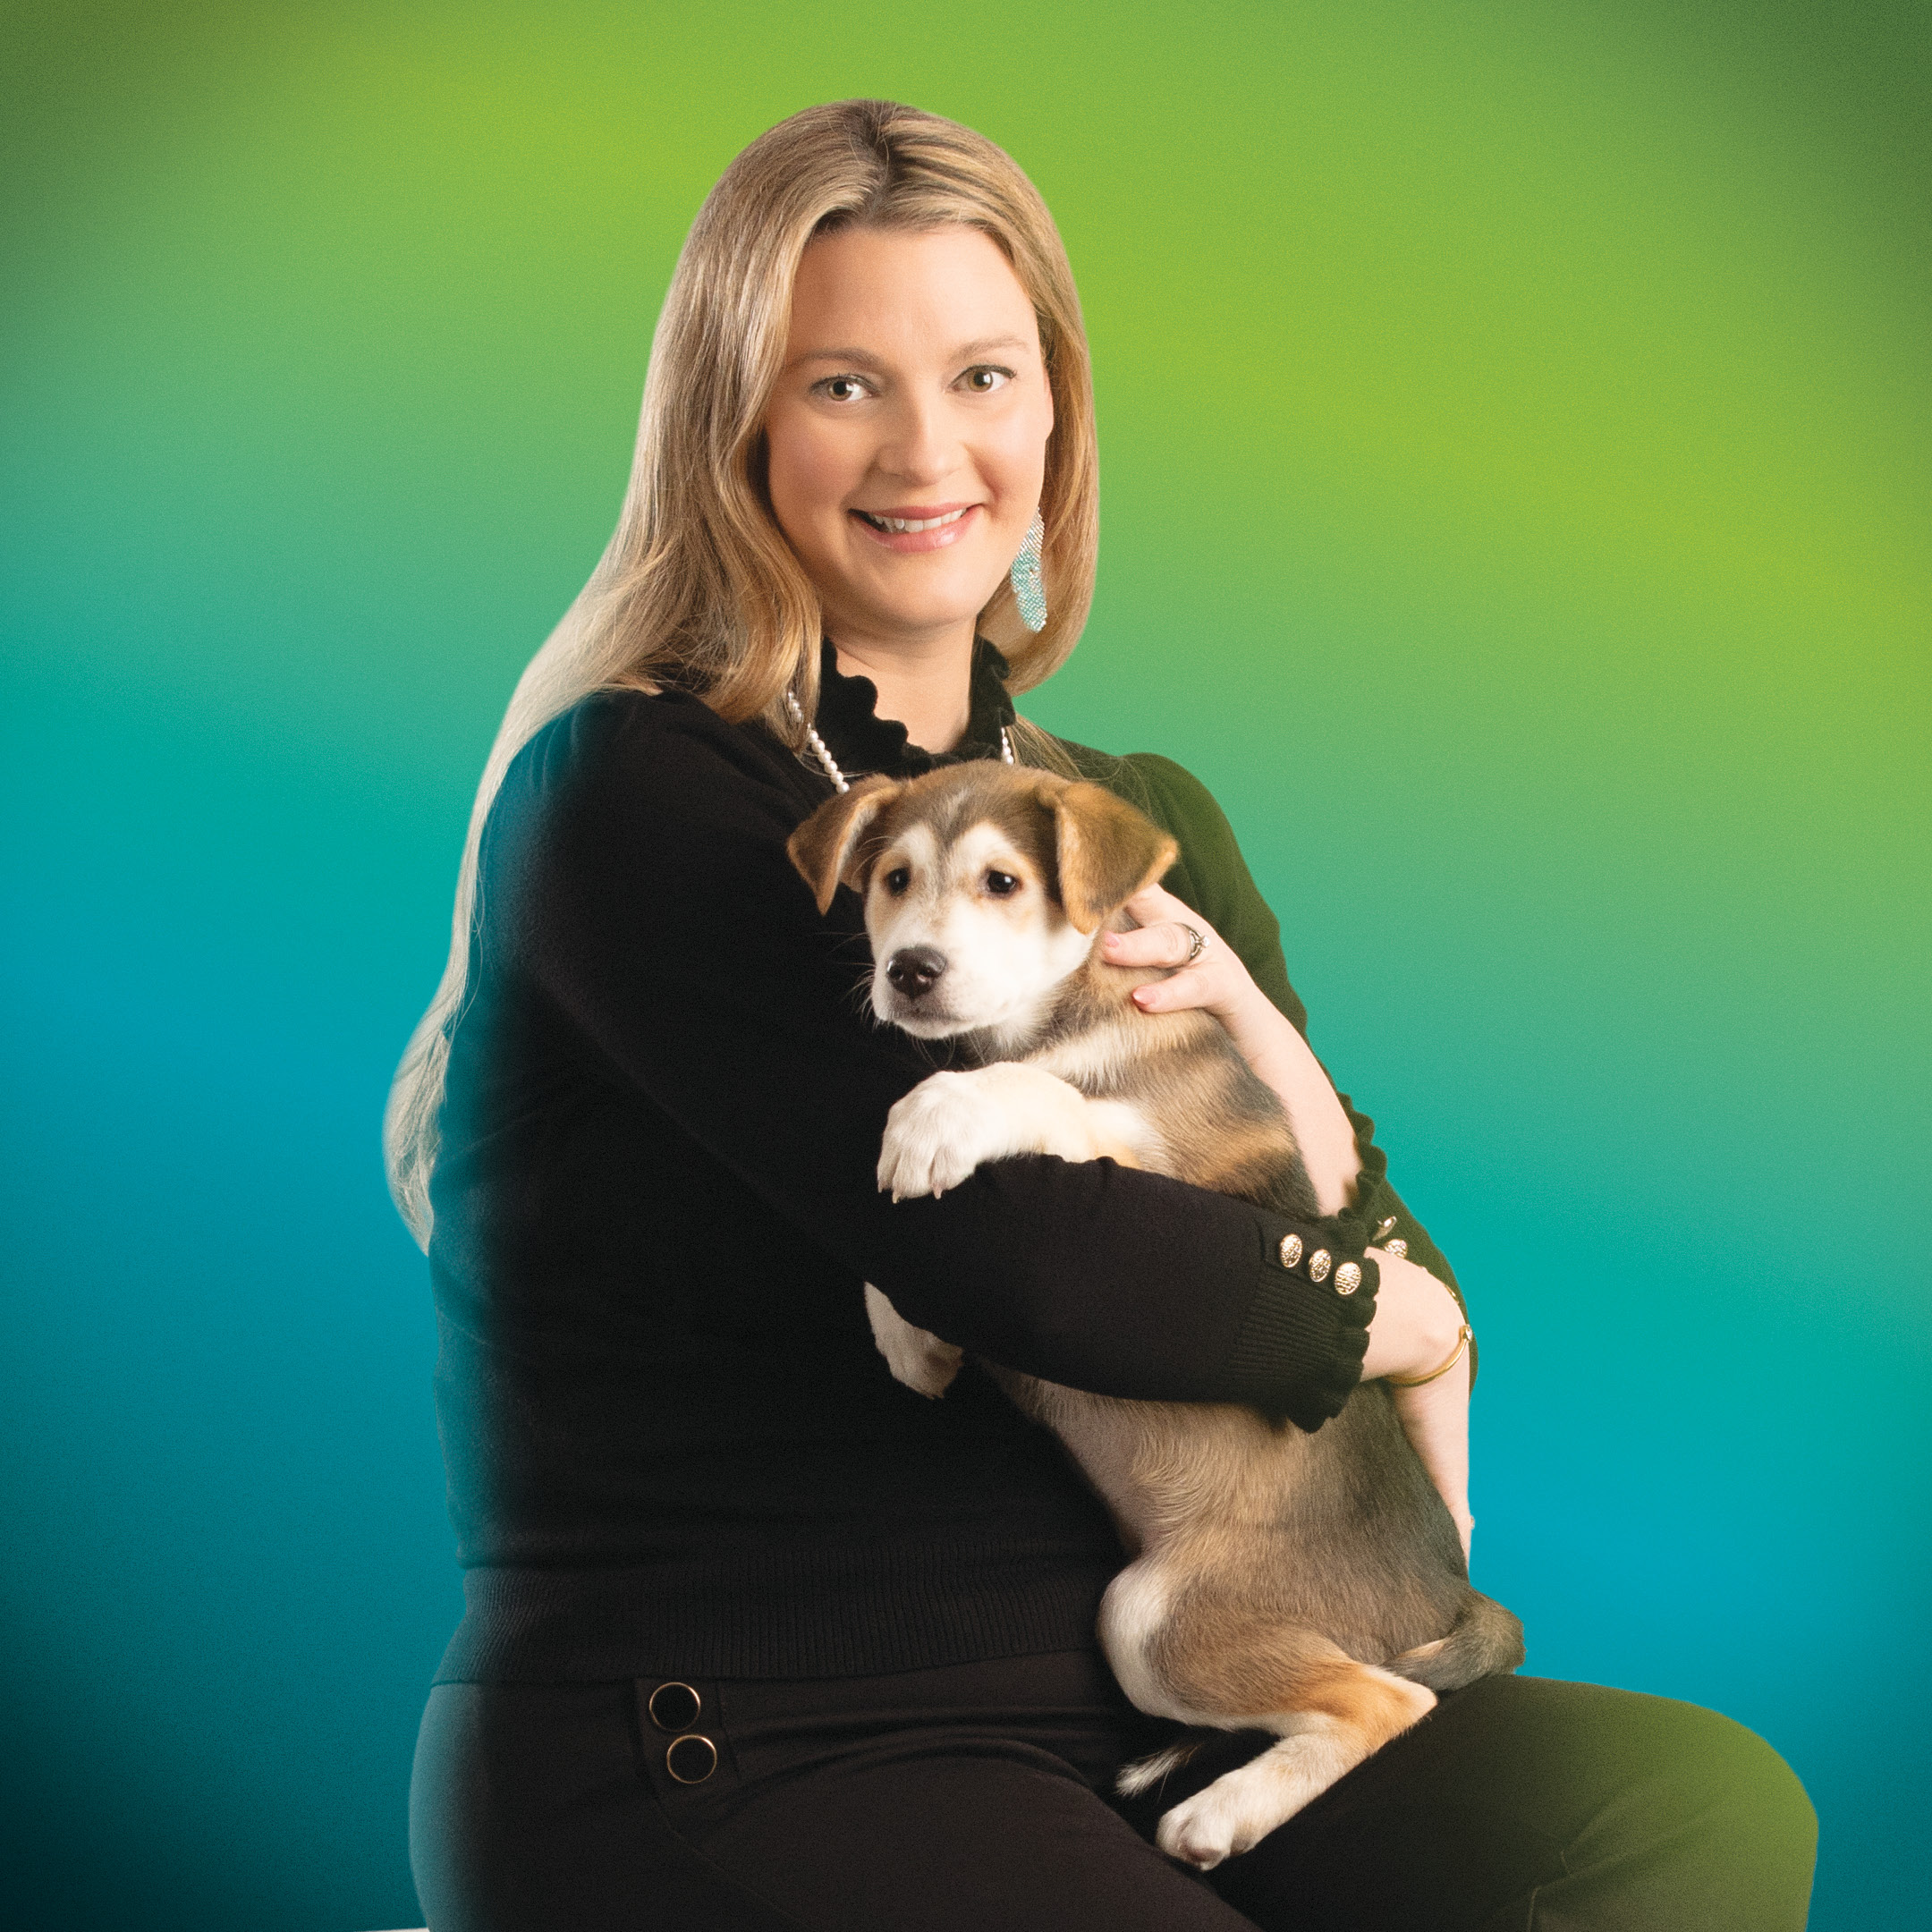 RRC Polytech graduate Jessica Miller is seated and wearing all black. She holds a brown and white puppy in her arms in front of a green and blue backdrop.